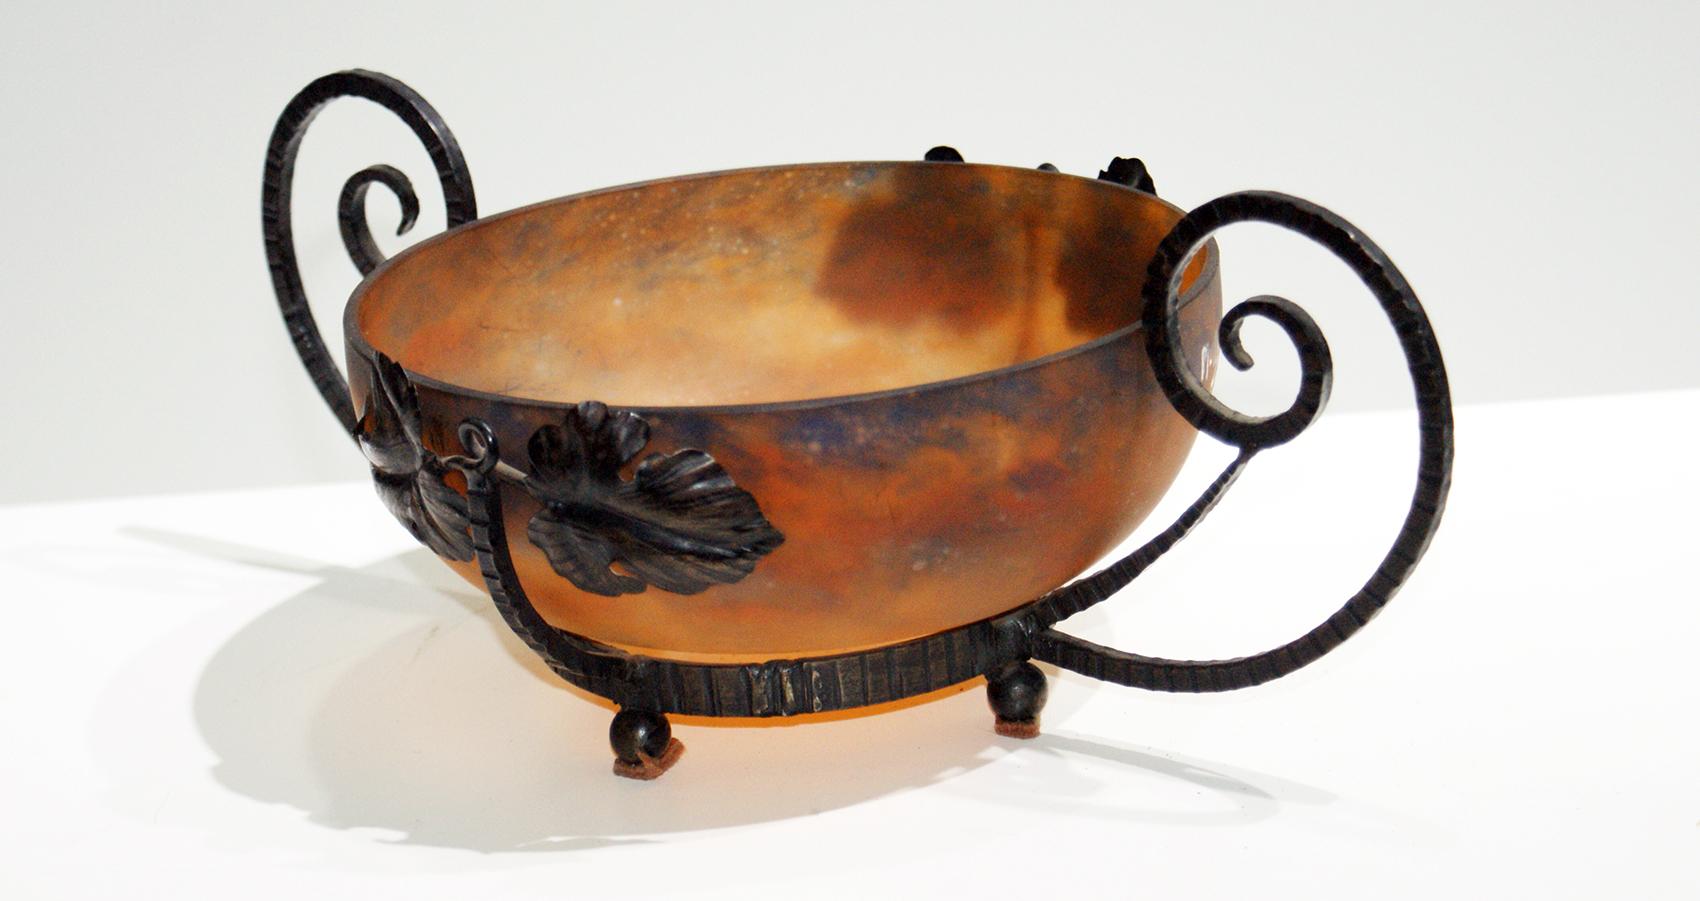 Art Deco bowl made of molten glass “Pâte de verre” and wrought iron. The wrought iron carrier is decorated with leaves and geometric motif and is made in the style of “Louis Majorelle”.
The coupe has a mix of blue and orange colors.
This piece is